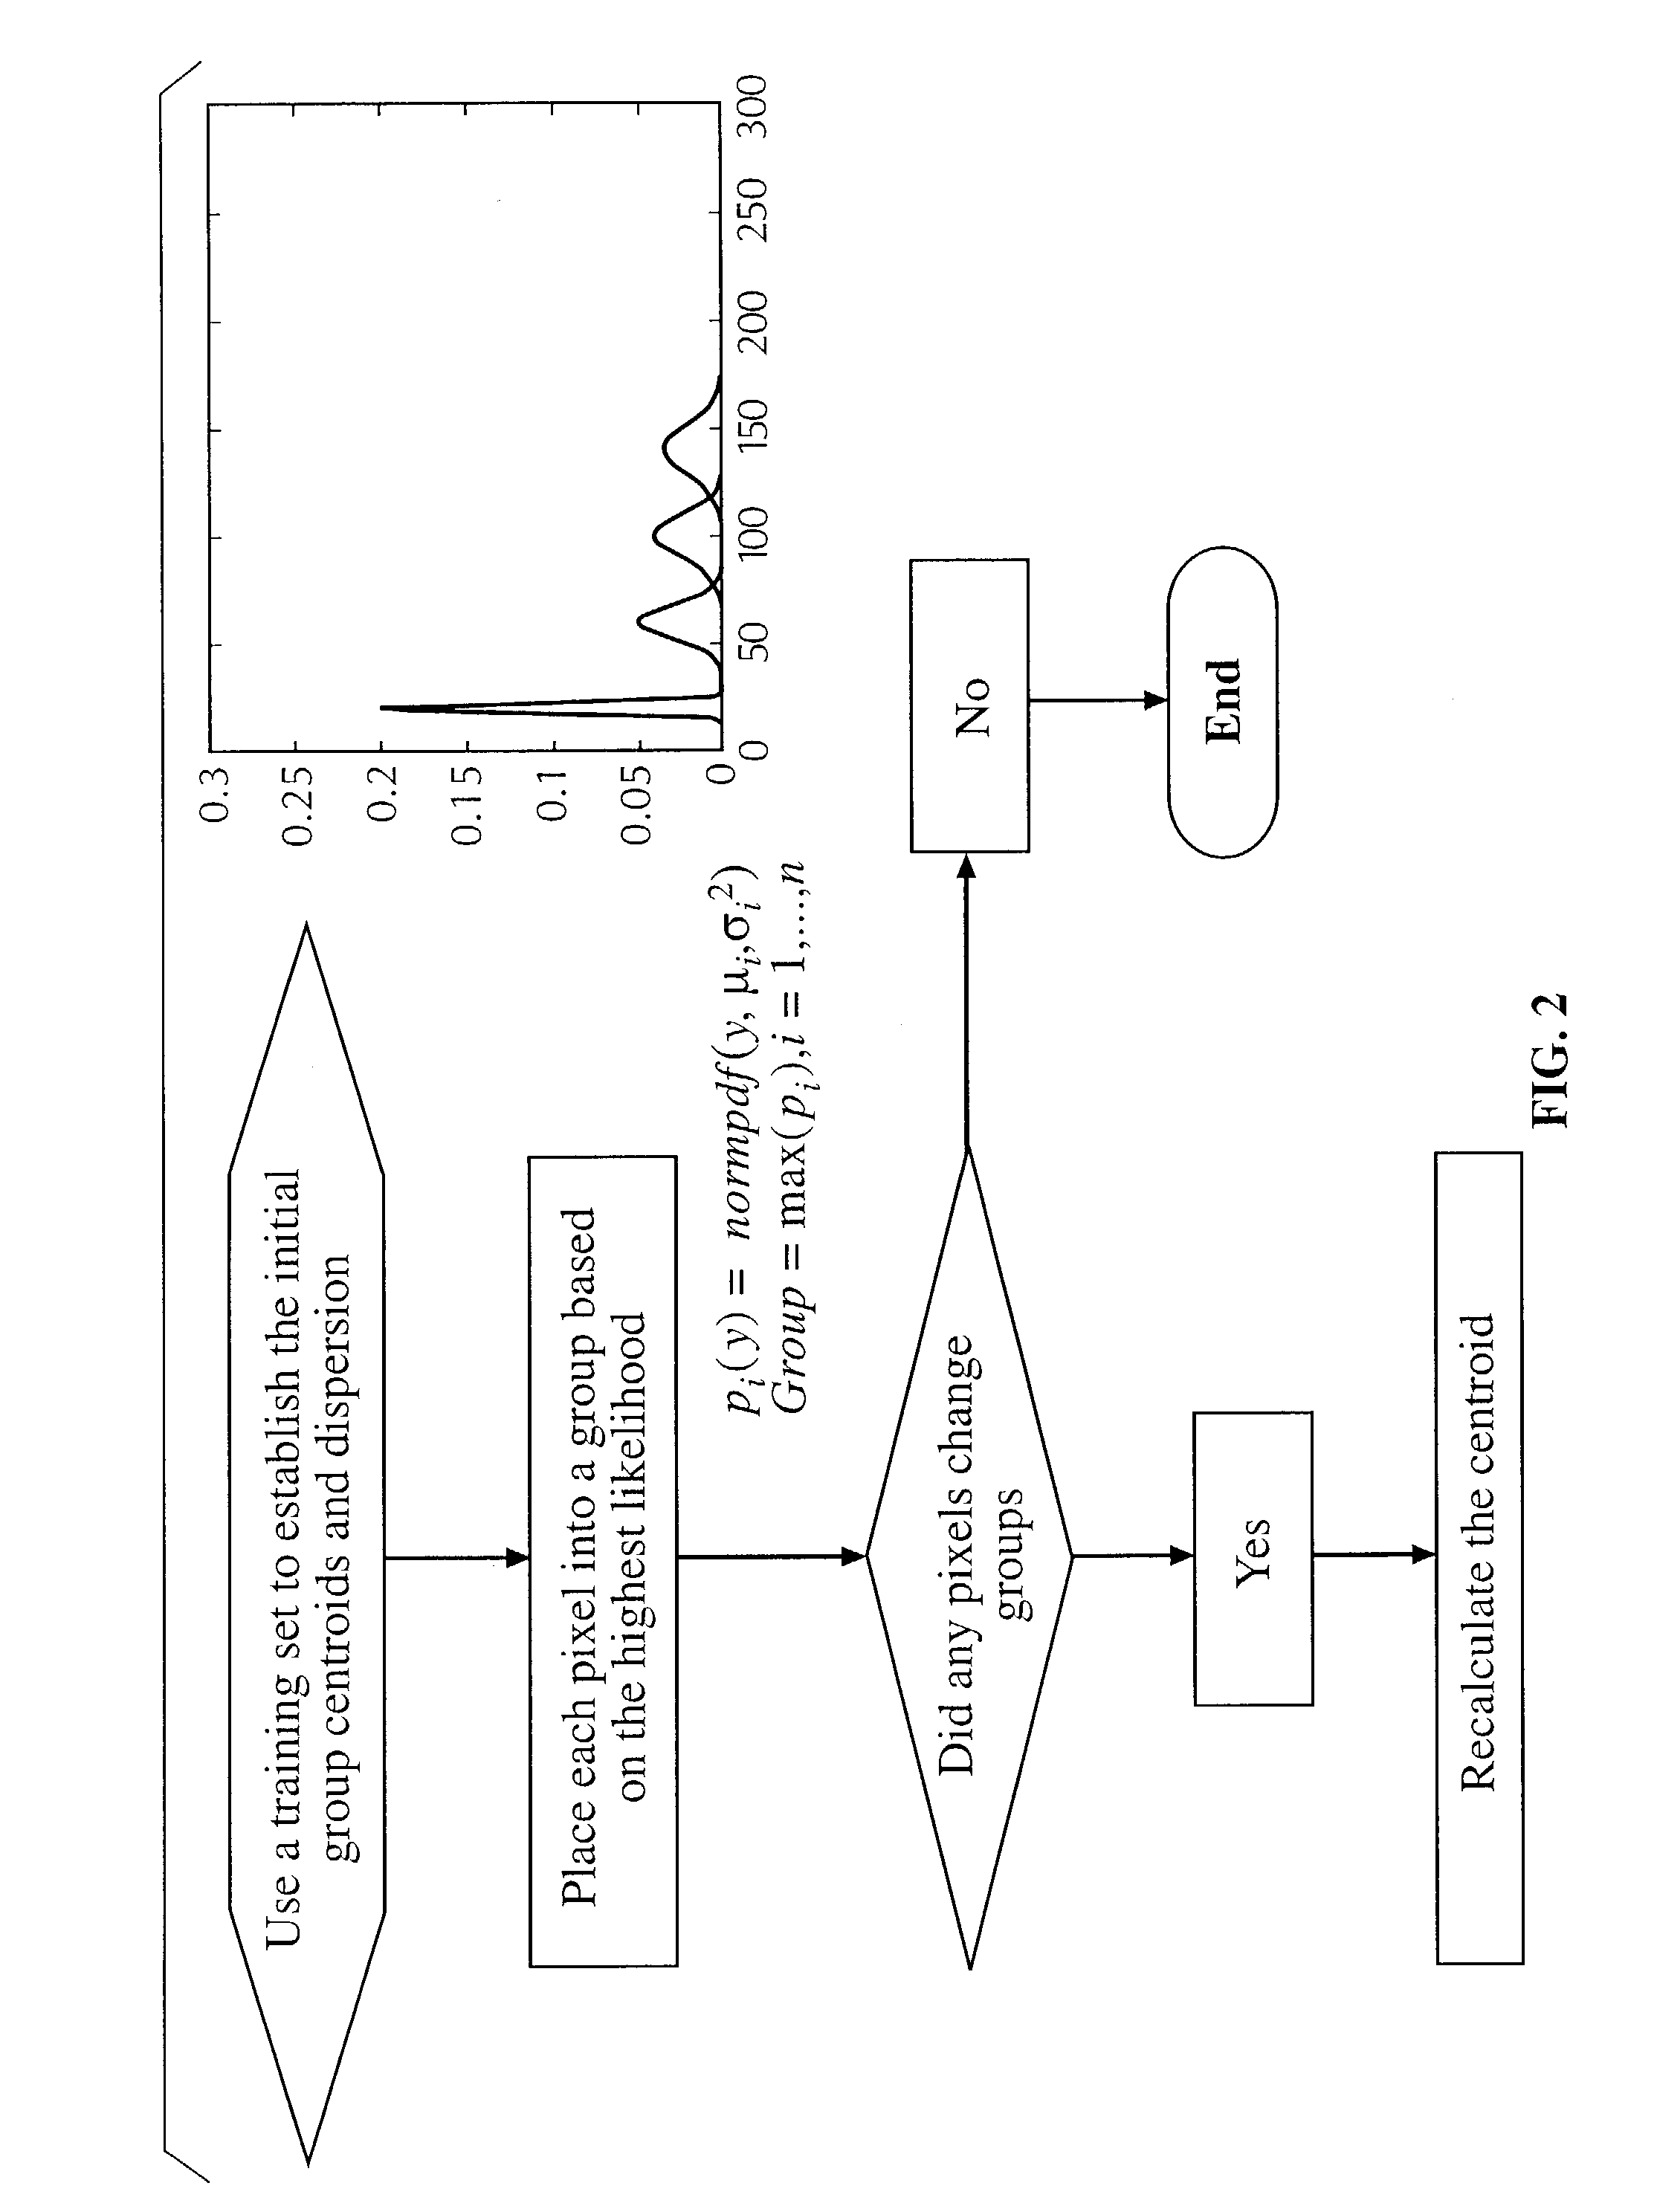 Method for determining the efficacy of an anti-cancer treatment using image analysis